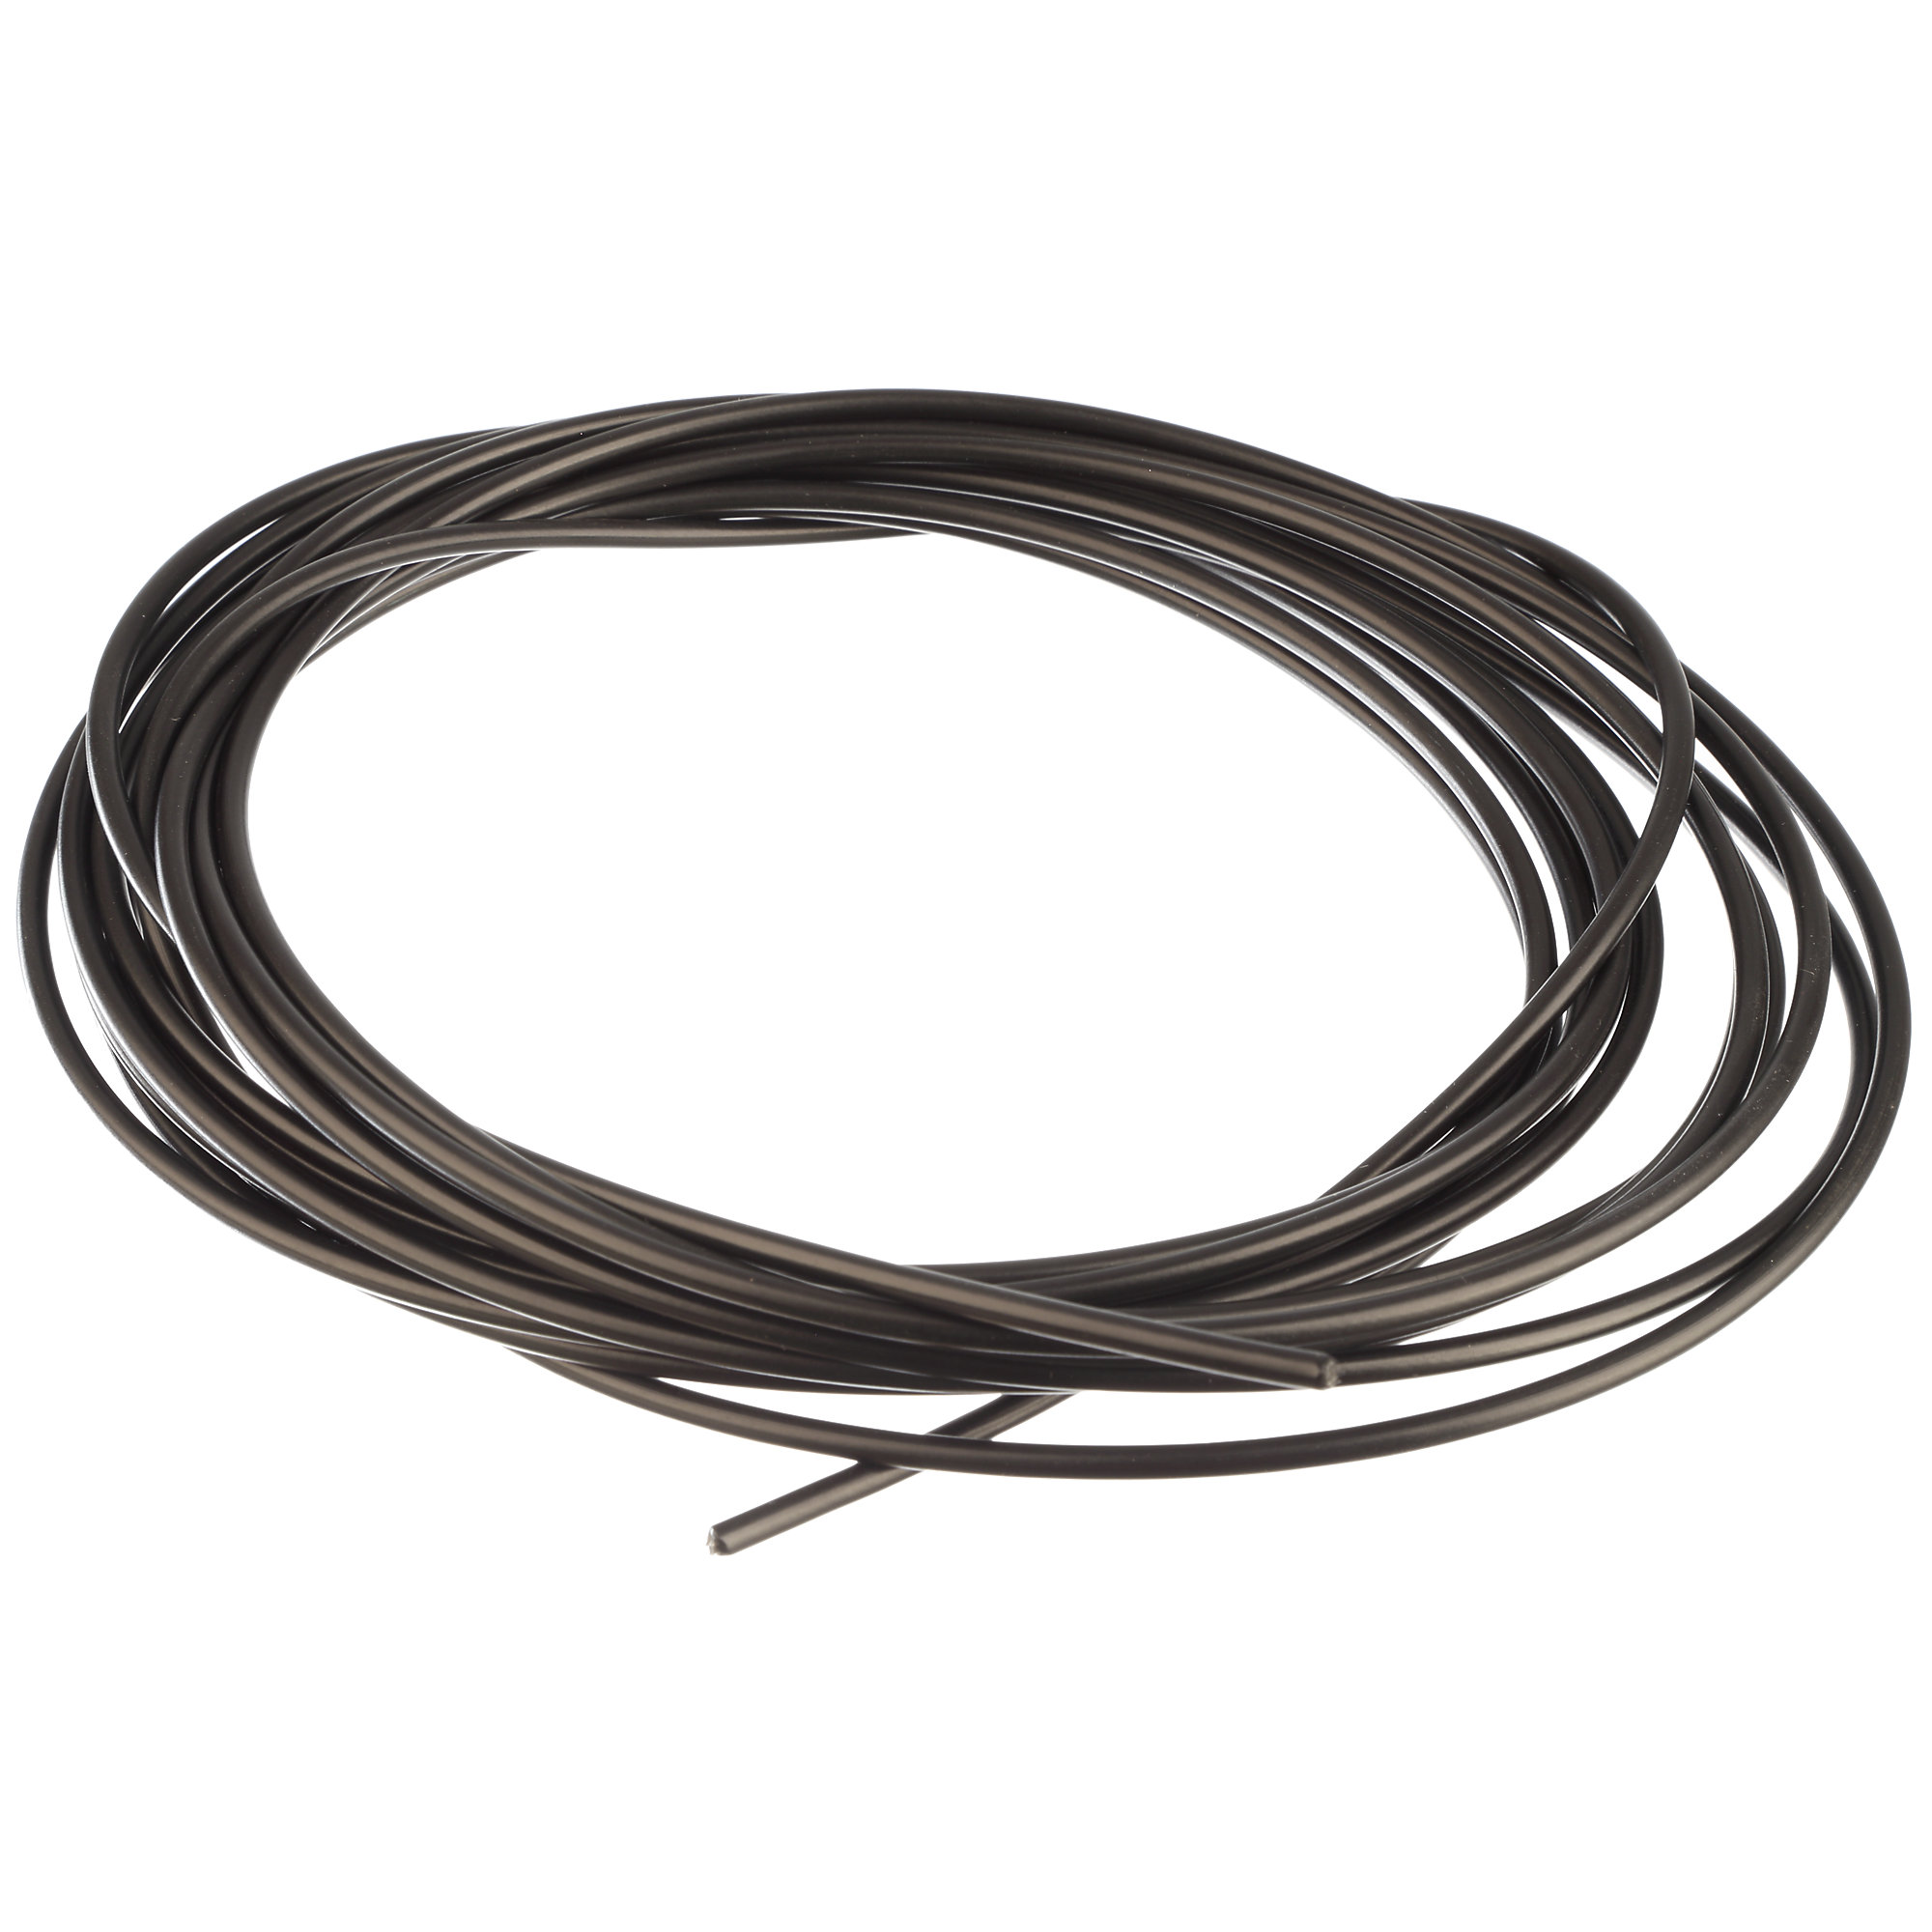 Cable, 6.5 Meters, Star Trac HumanSport DFT 8000